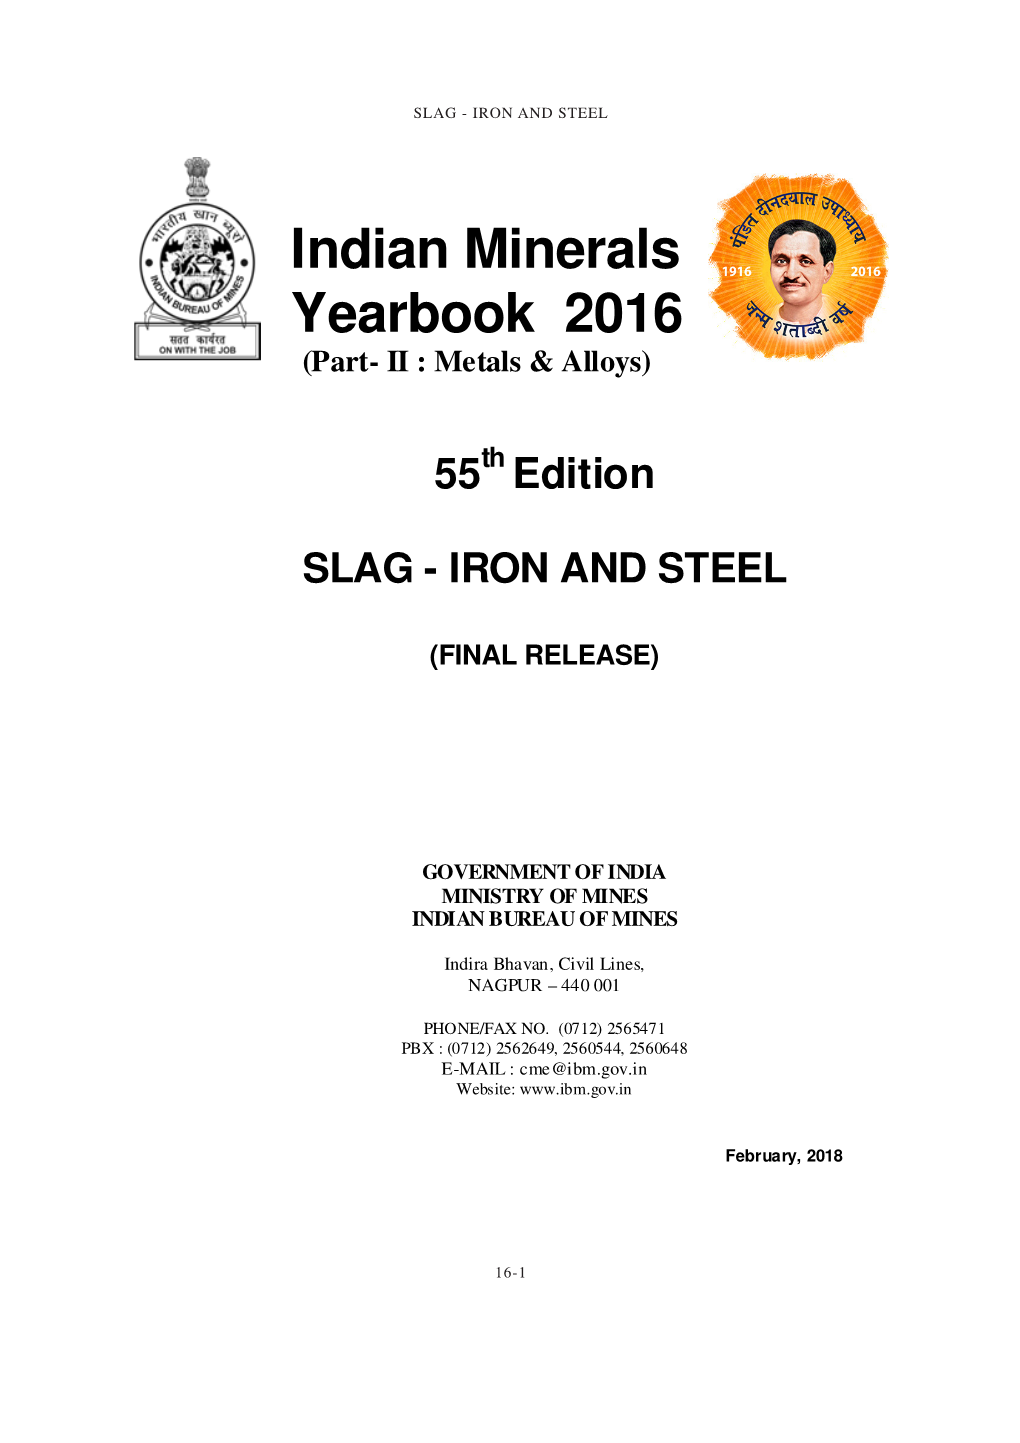 Slag-Iron and Steel 2016.Pmd